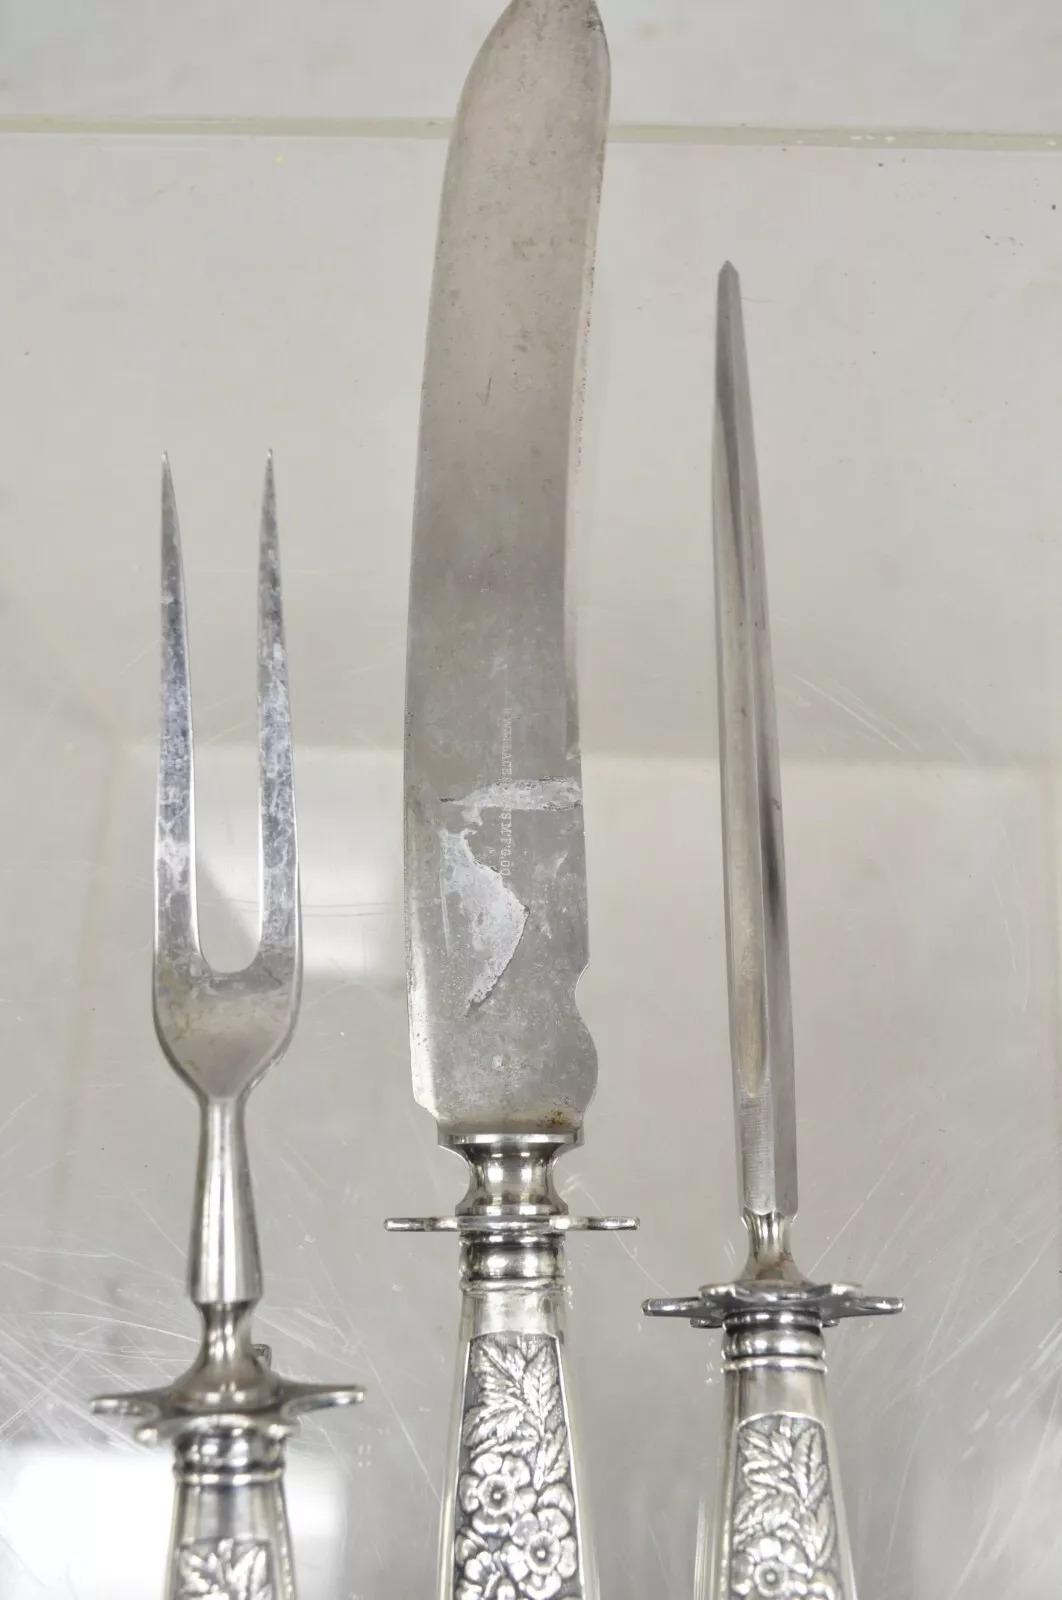 Antique R Wallace & Sons Victorian Silver Plated Repousse Meat Carving Set - 3Pc For Sale 4